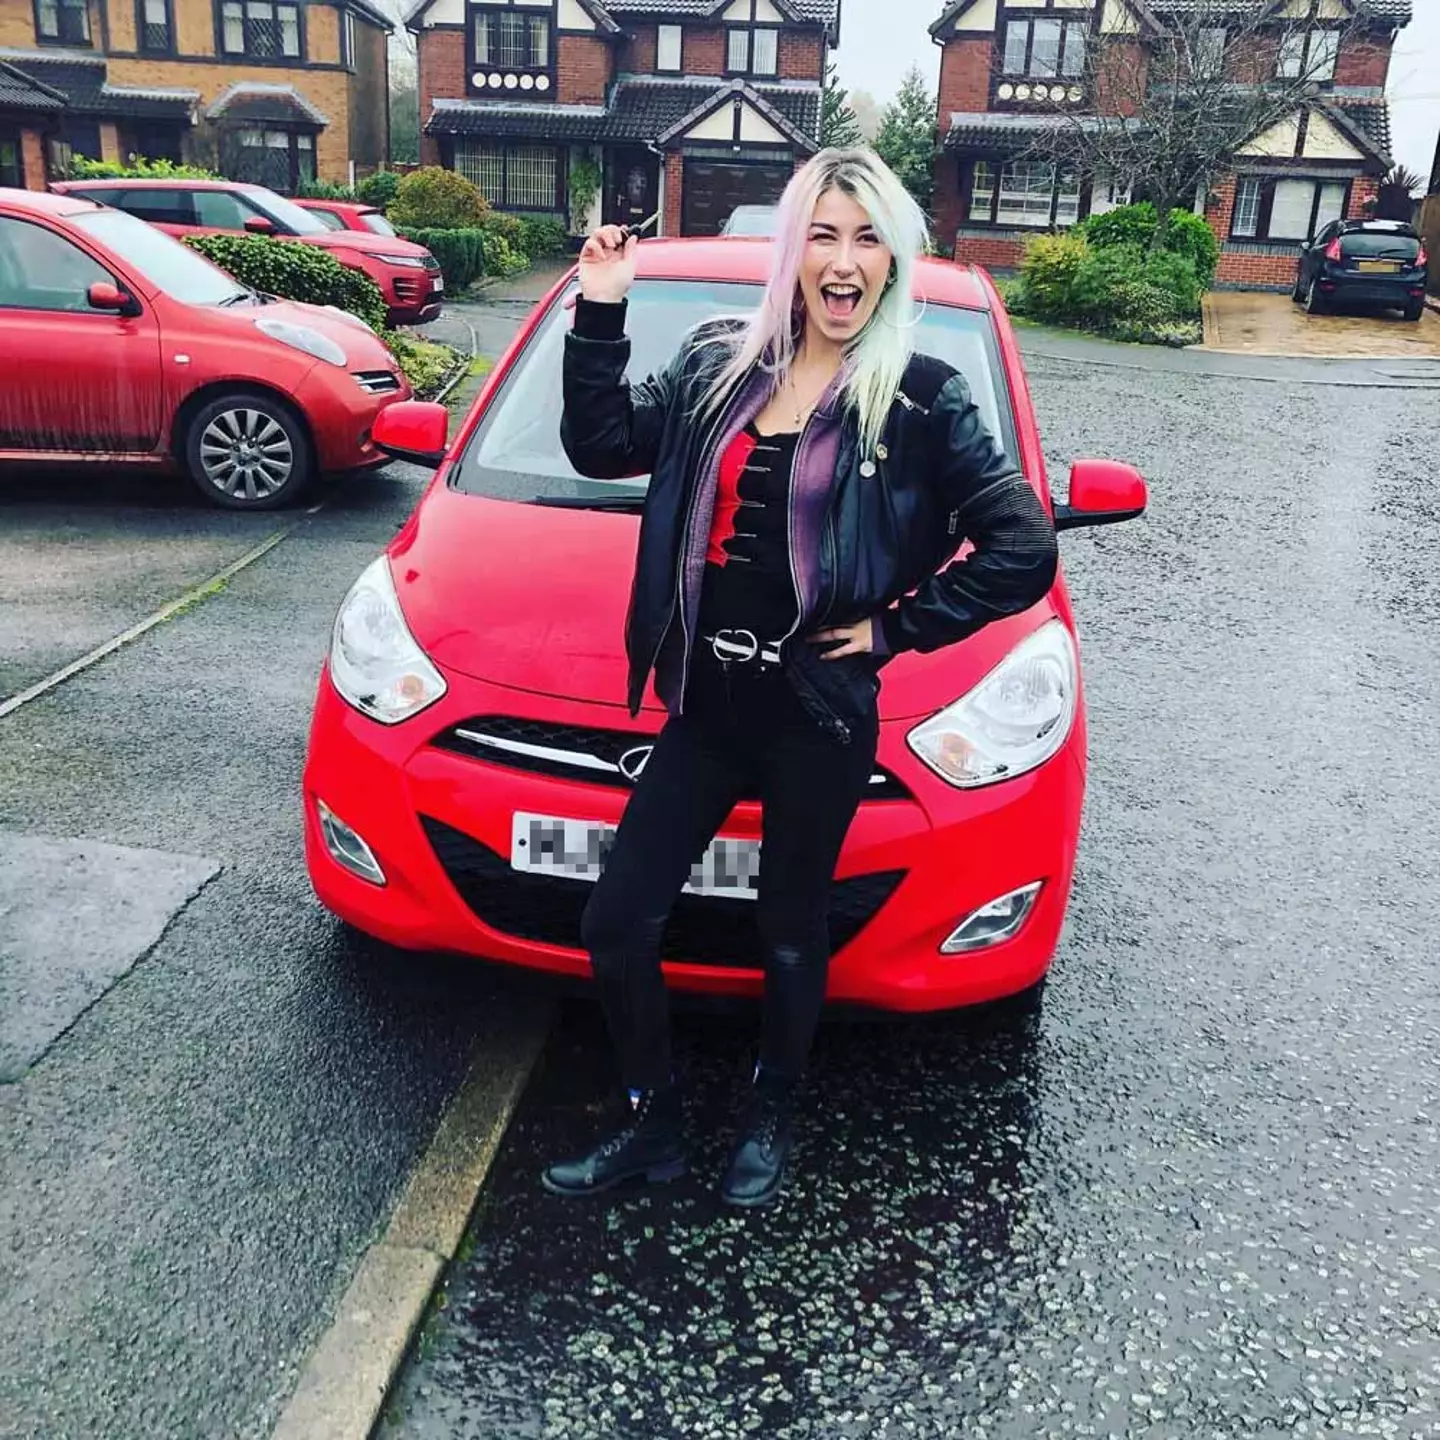 Megan bought a car to help her visit every Greggs.